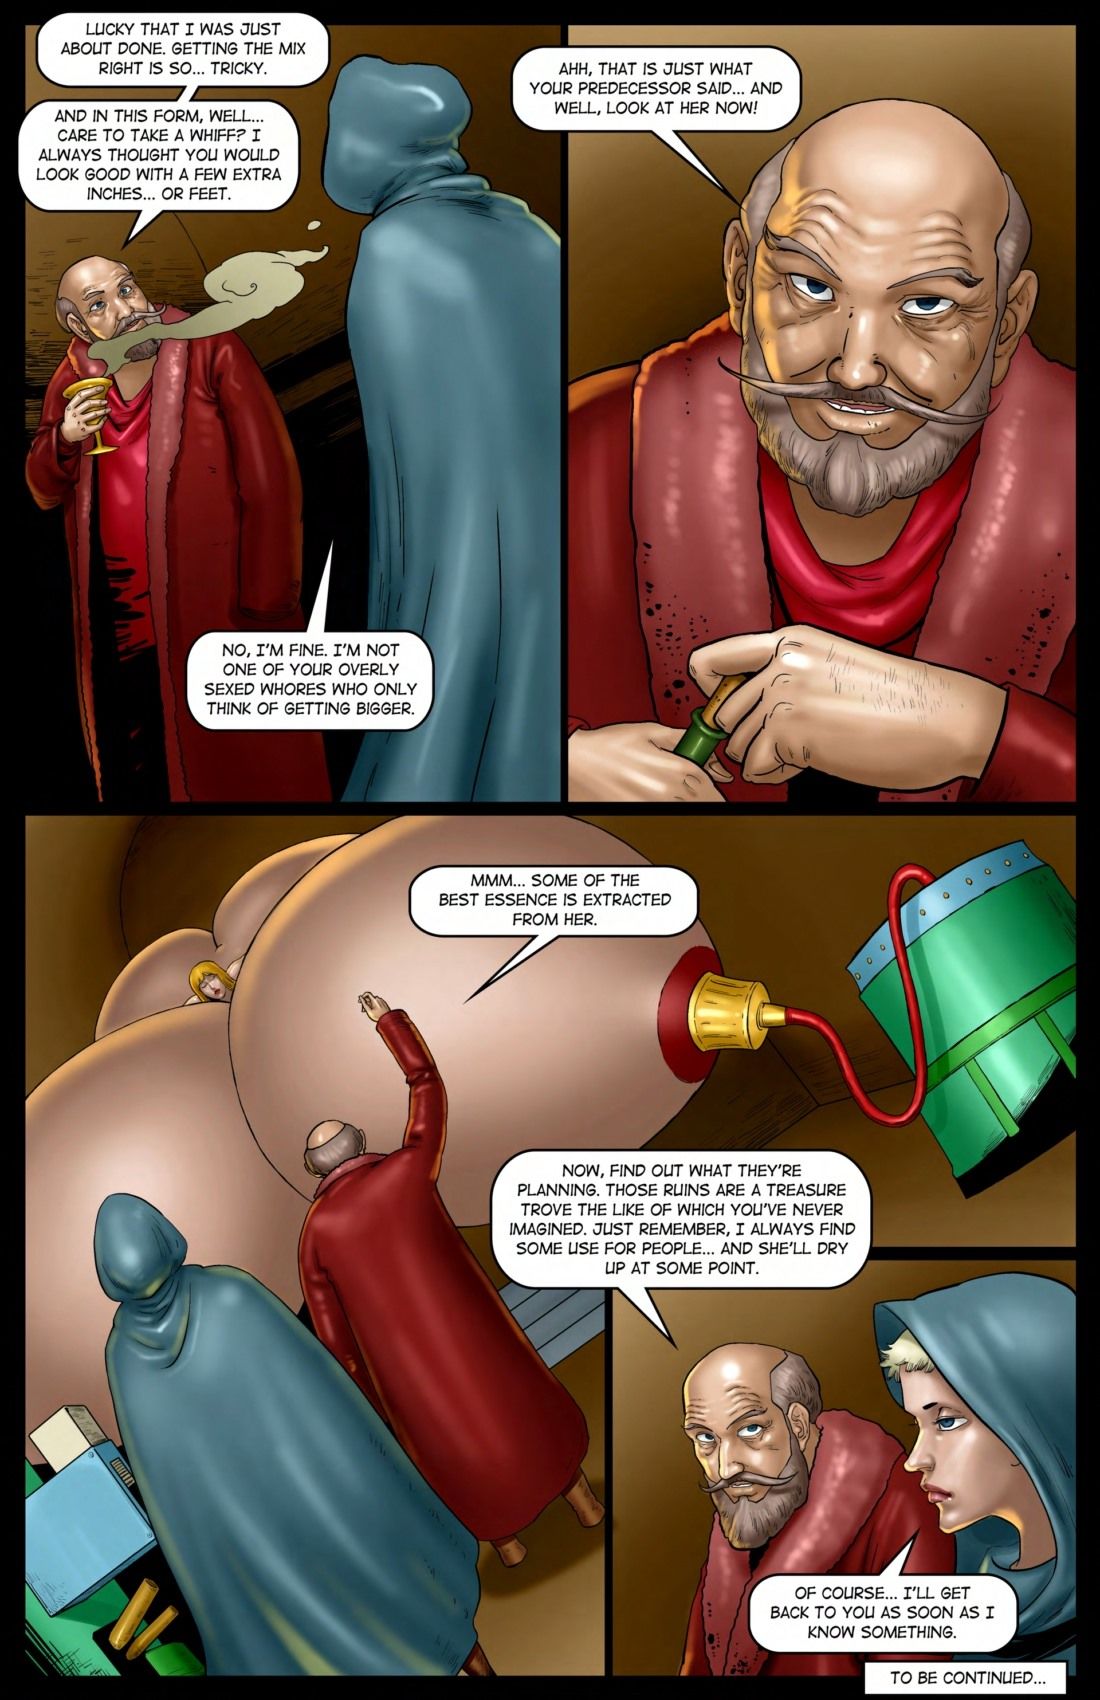 Nova Illyricum 2 Mad Science and Magic (ExpansionFan) page 17